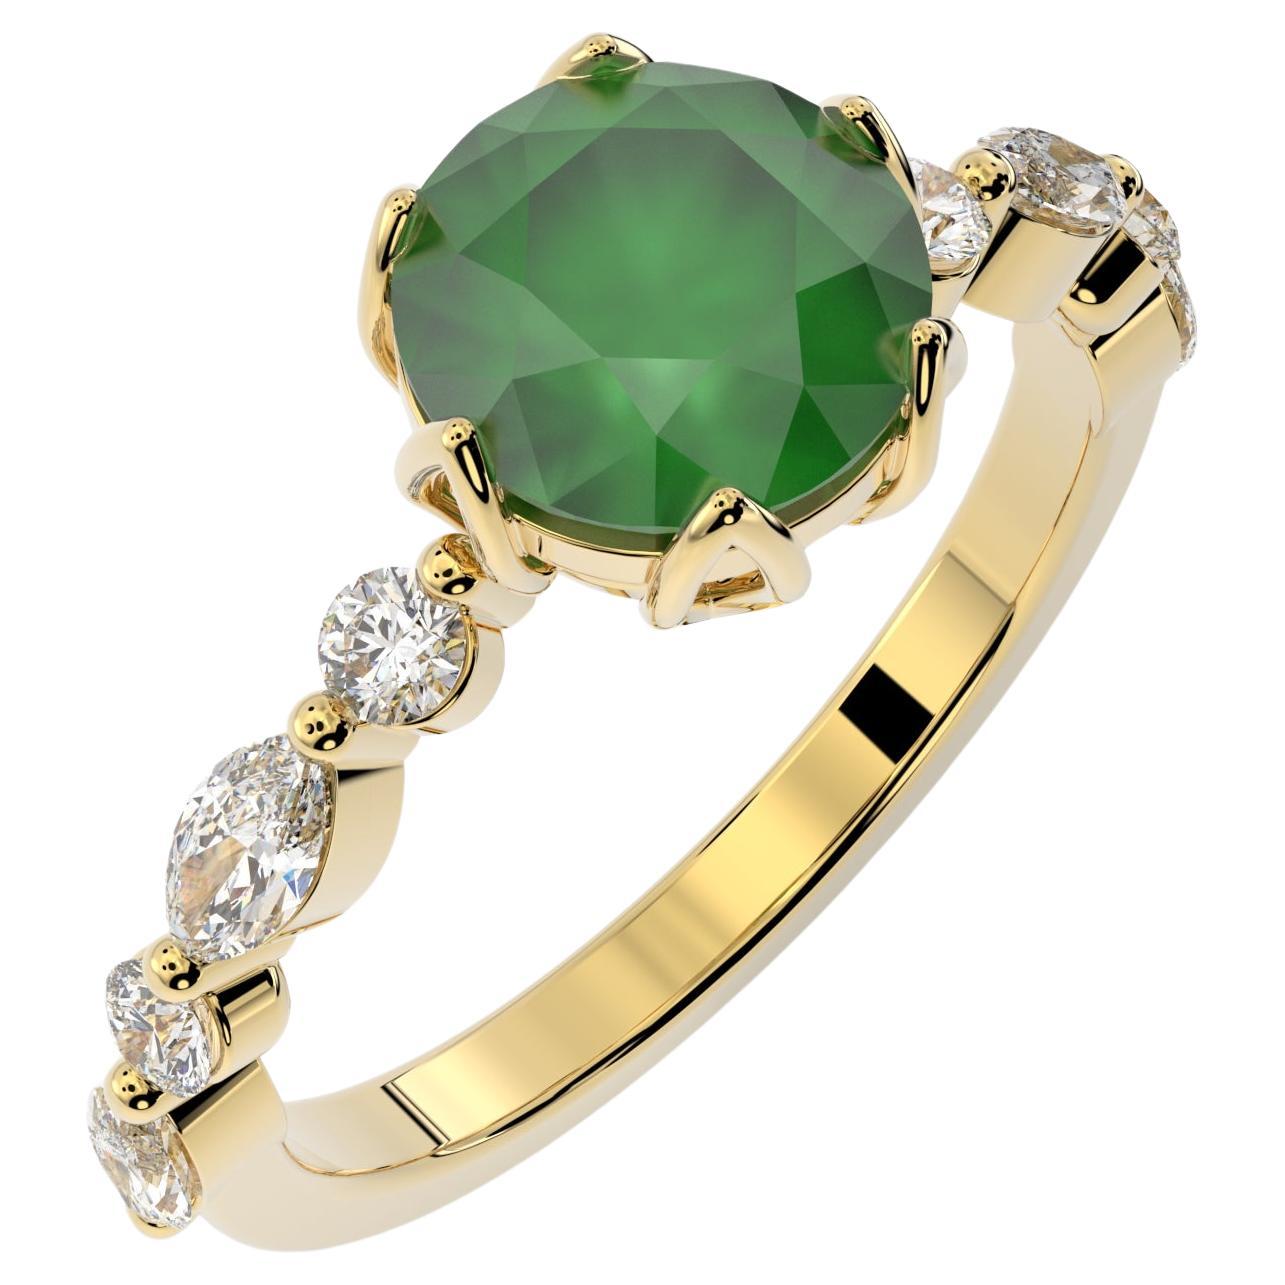 Green Emerald Engagement Ring with Round and Marquise Diamonds set in 18K gold